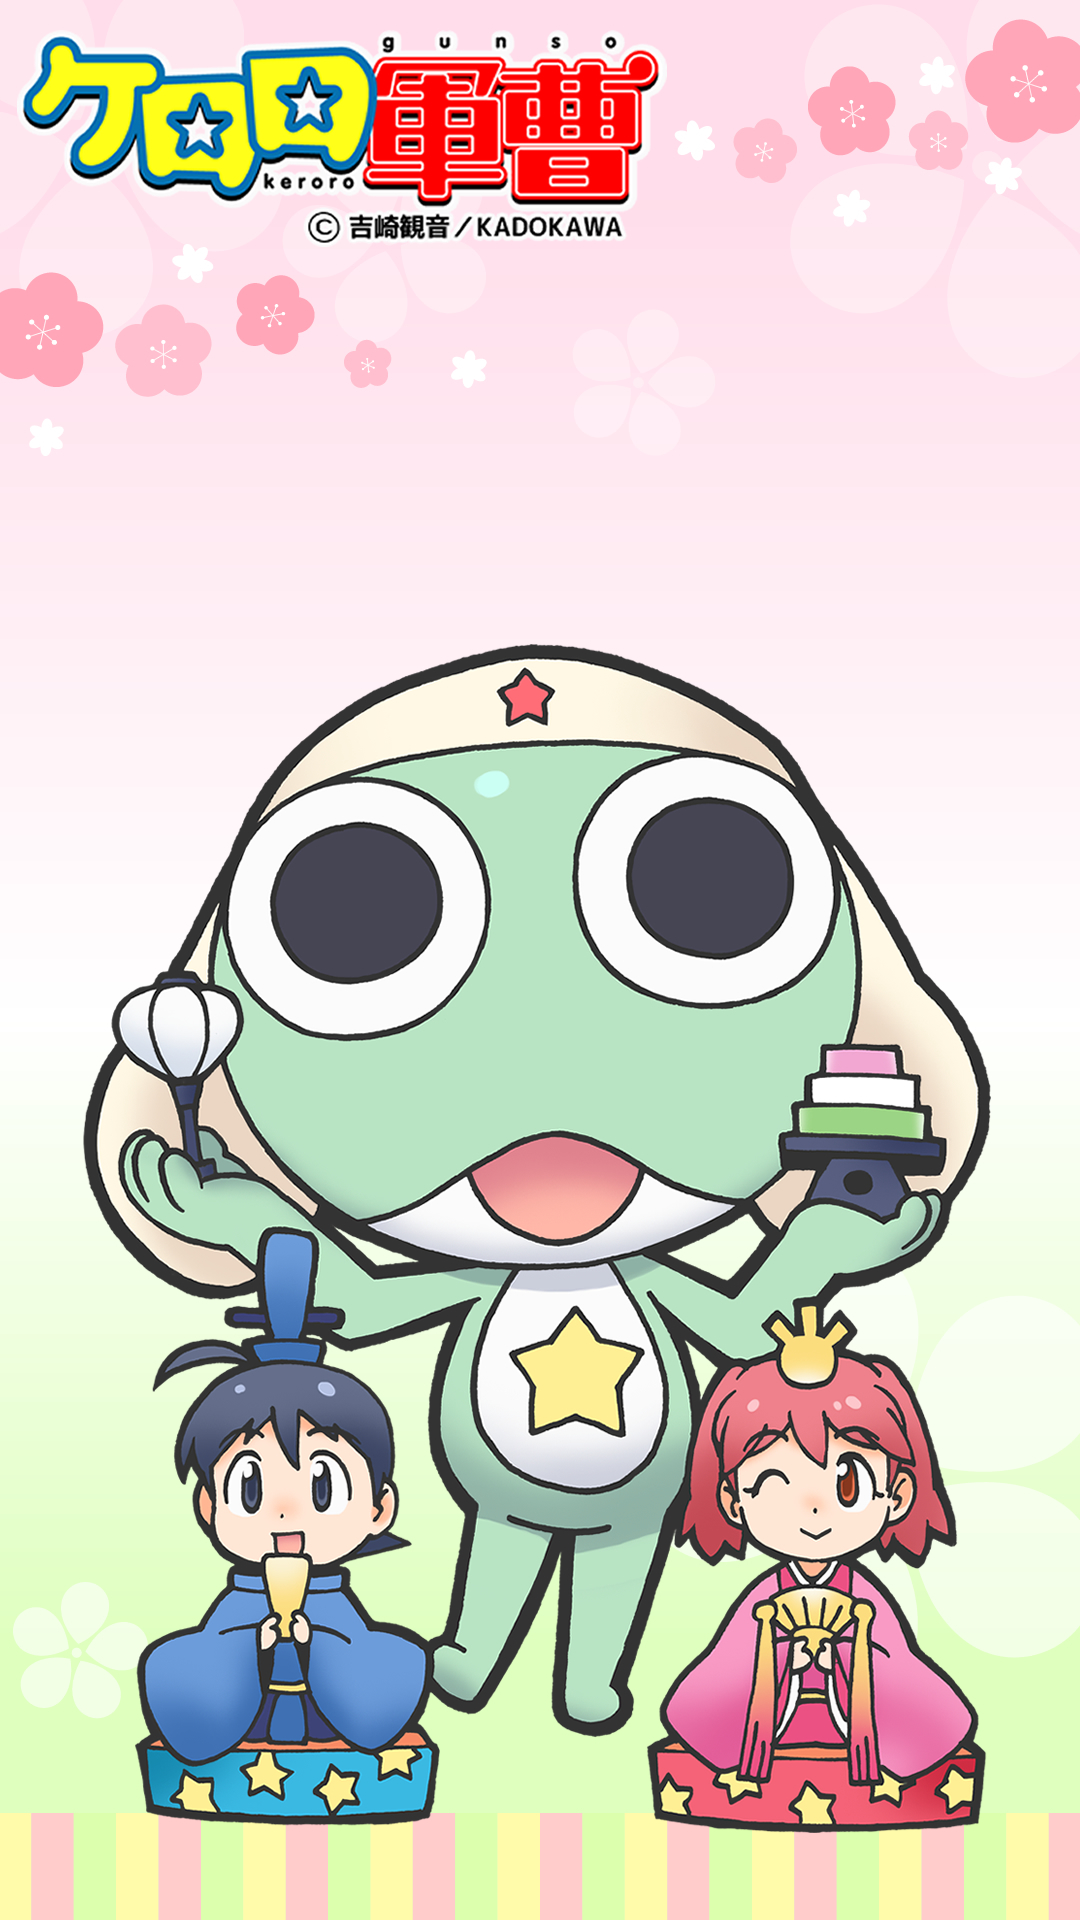 1080x1920 Sgt Frog official monthly wallpapers Album on Imgur